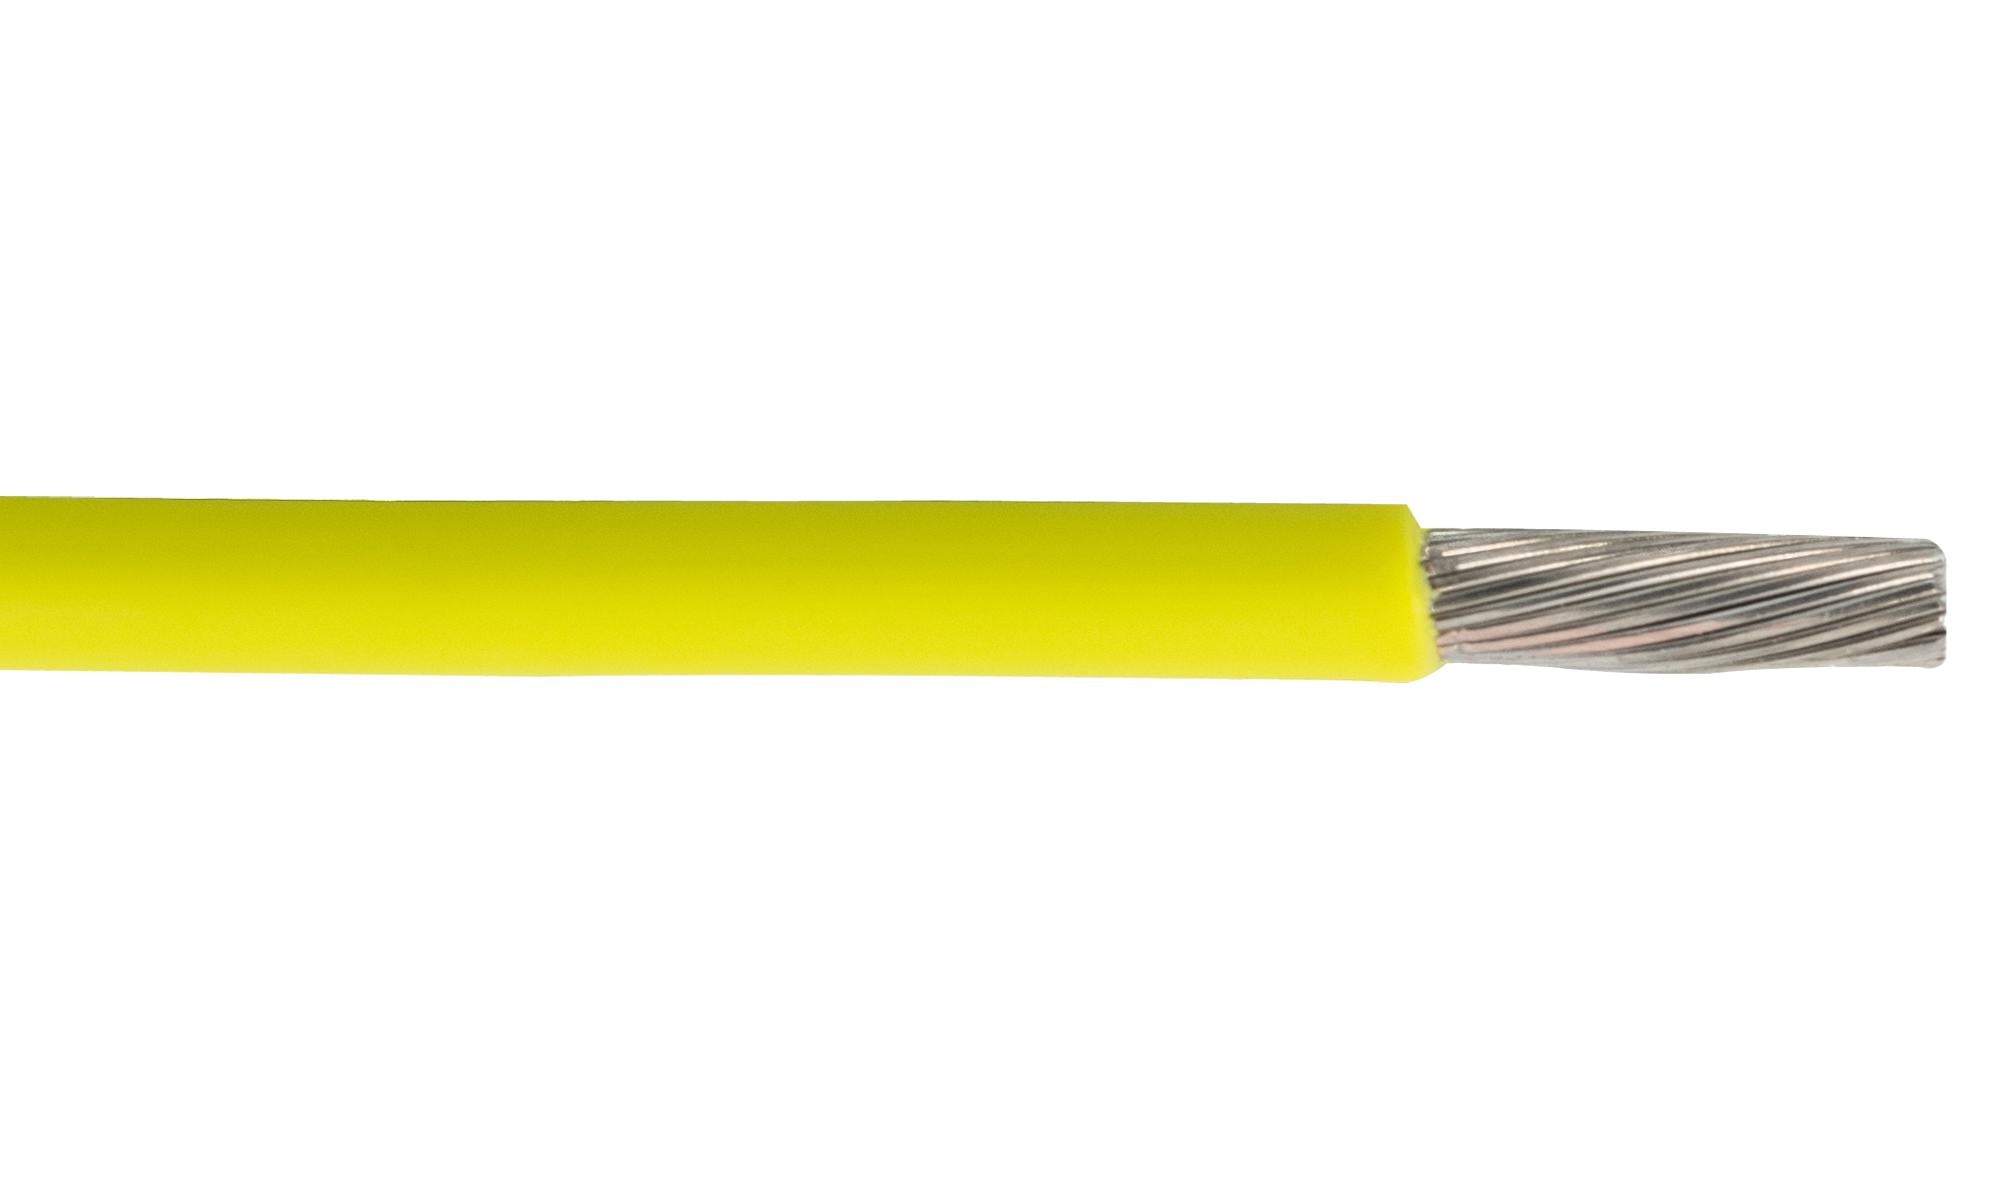 67150 YL HOOK-UP WIRE, 1.5MM2, YELLOW, PER M ALPHA WIRE